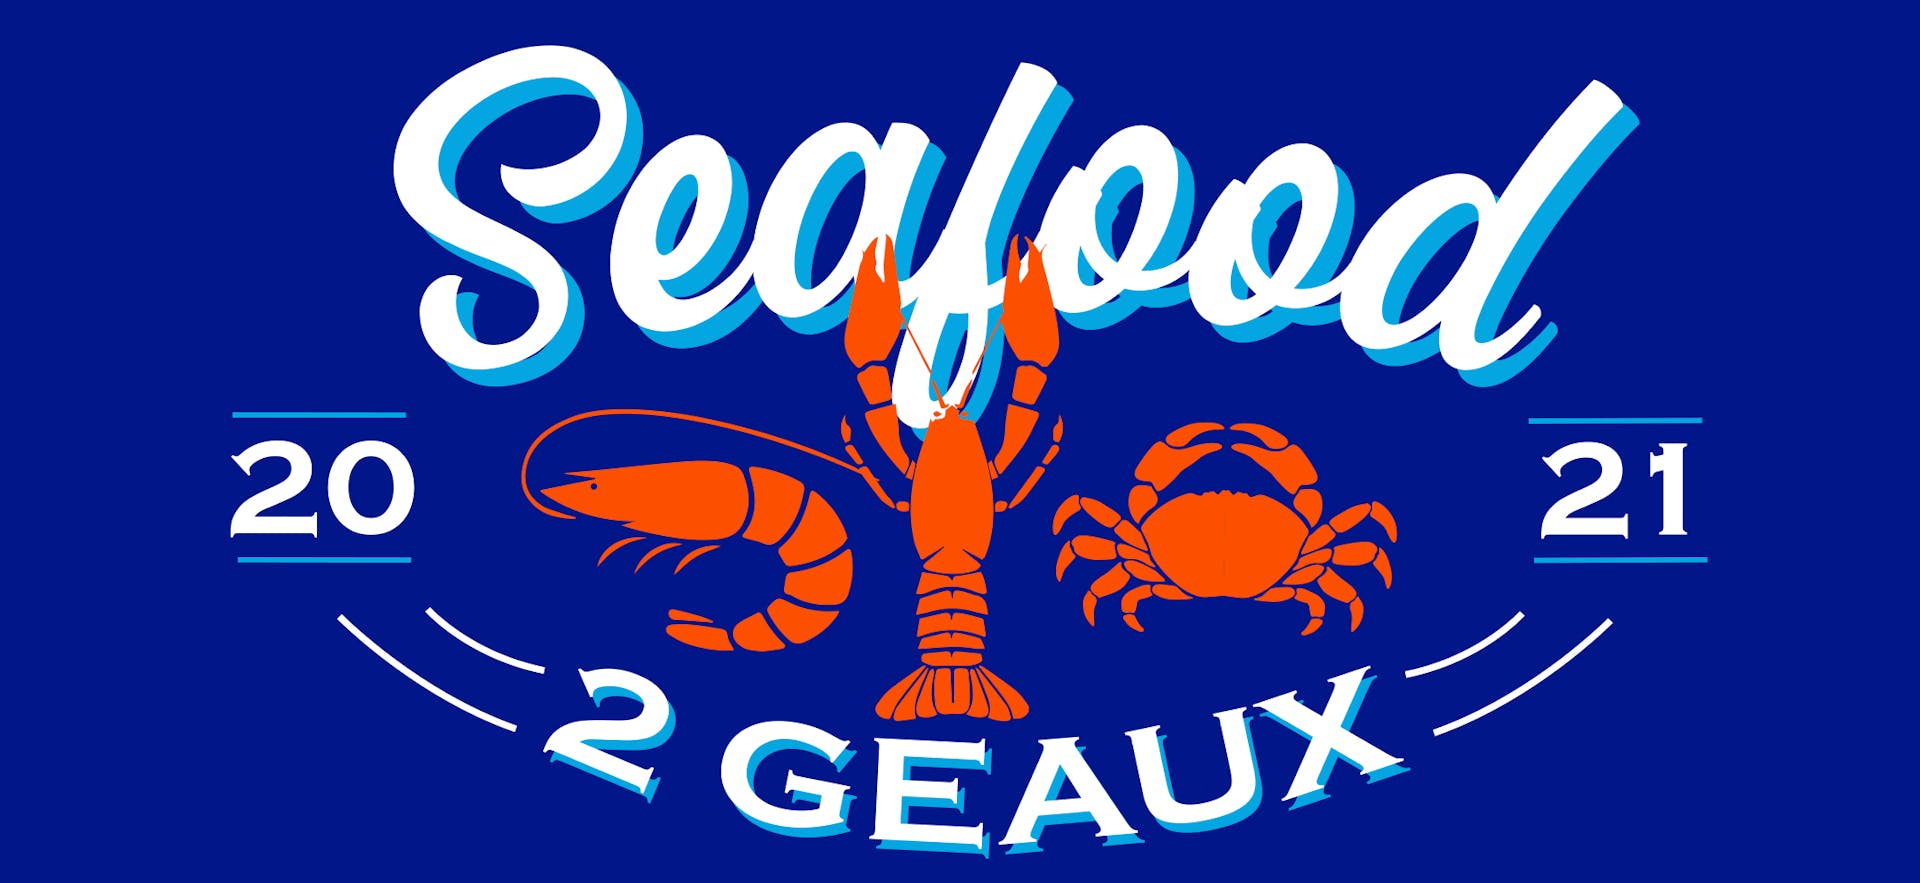 Seafood 2 Geaux